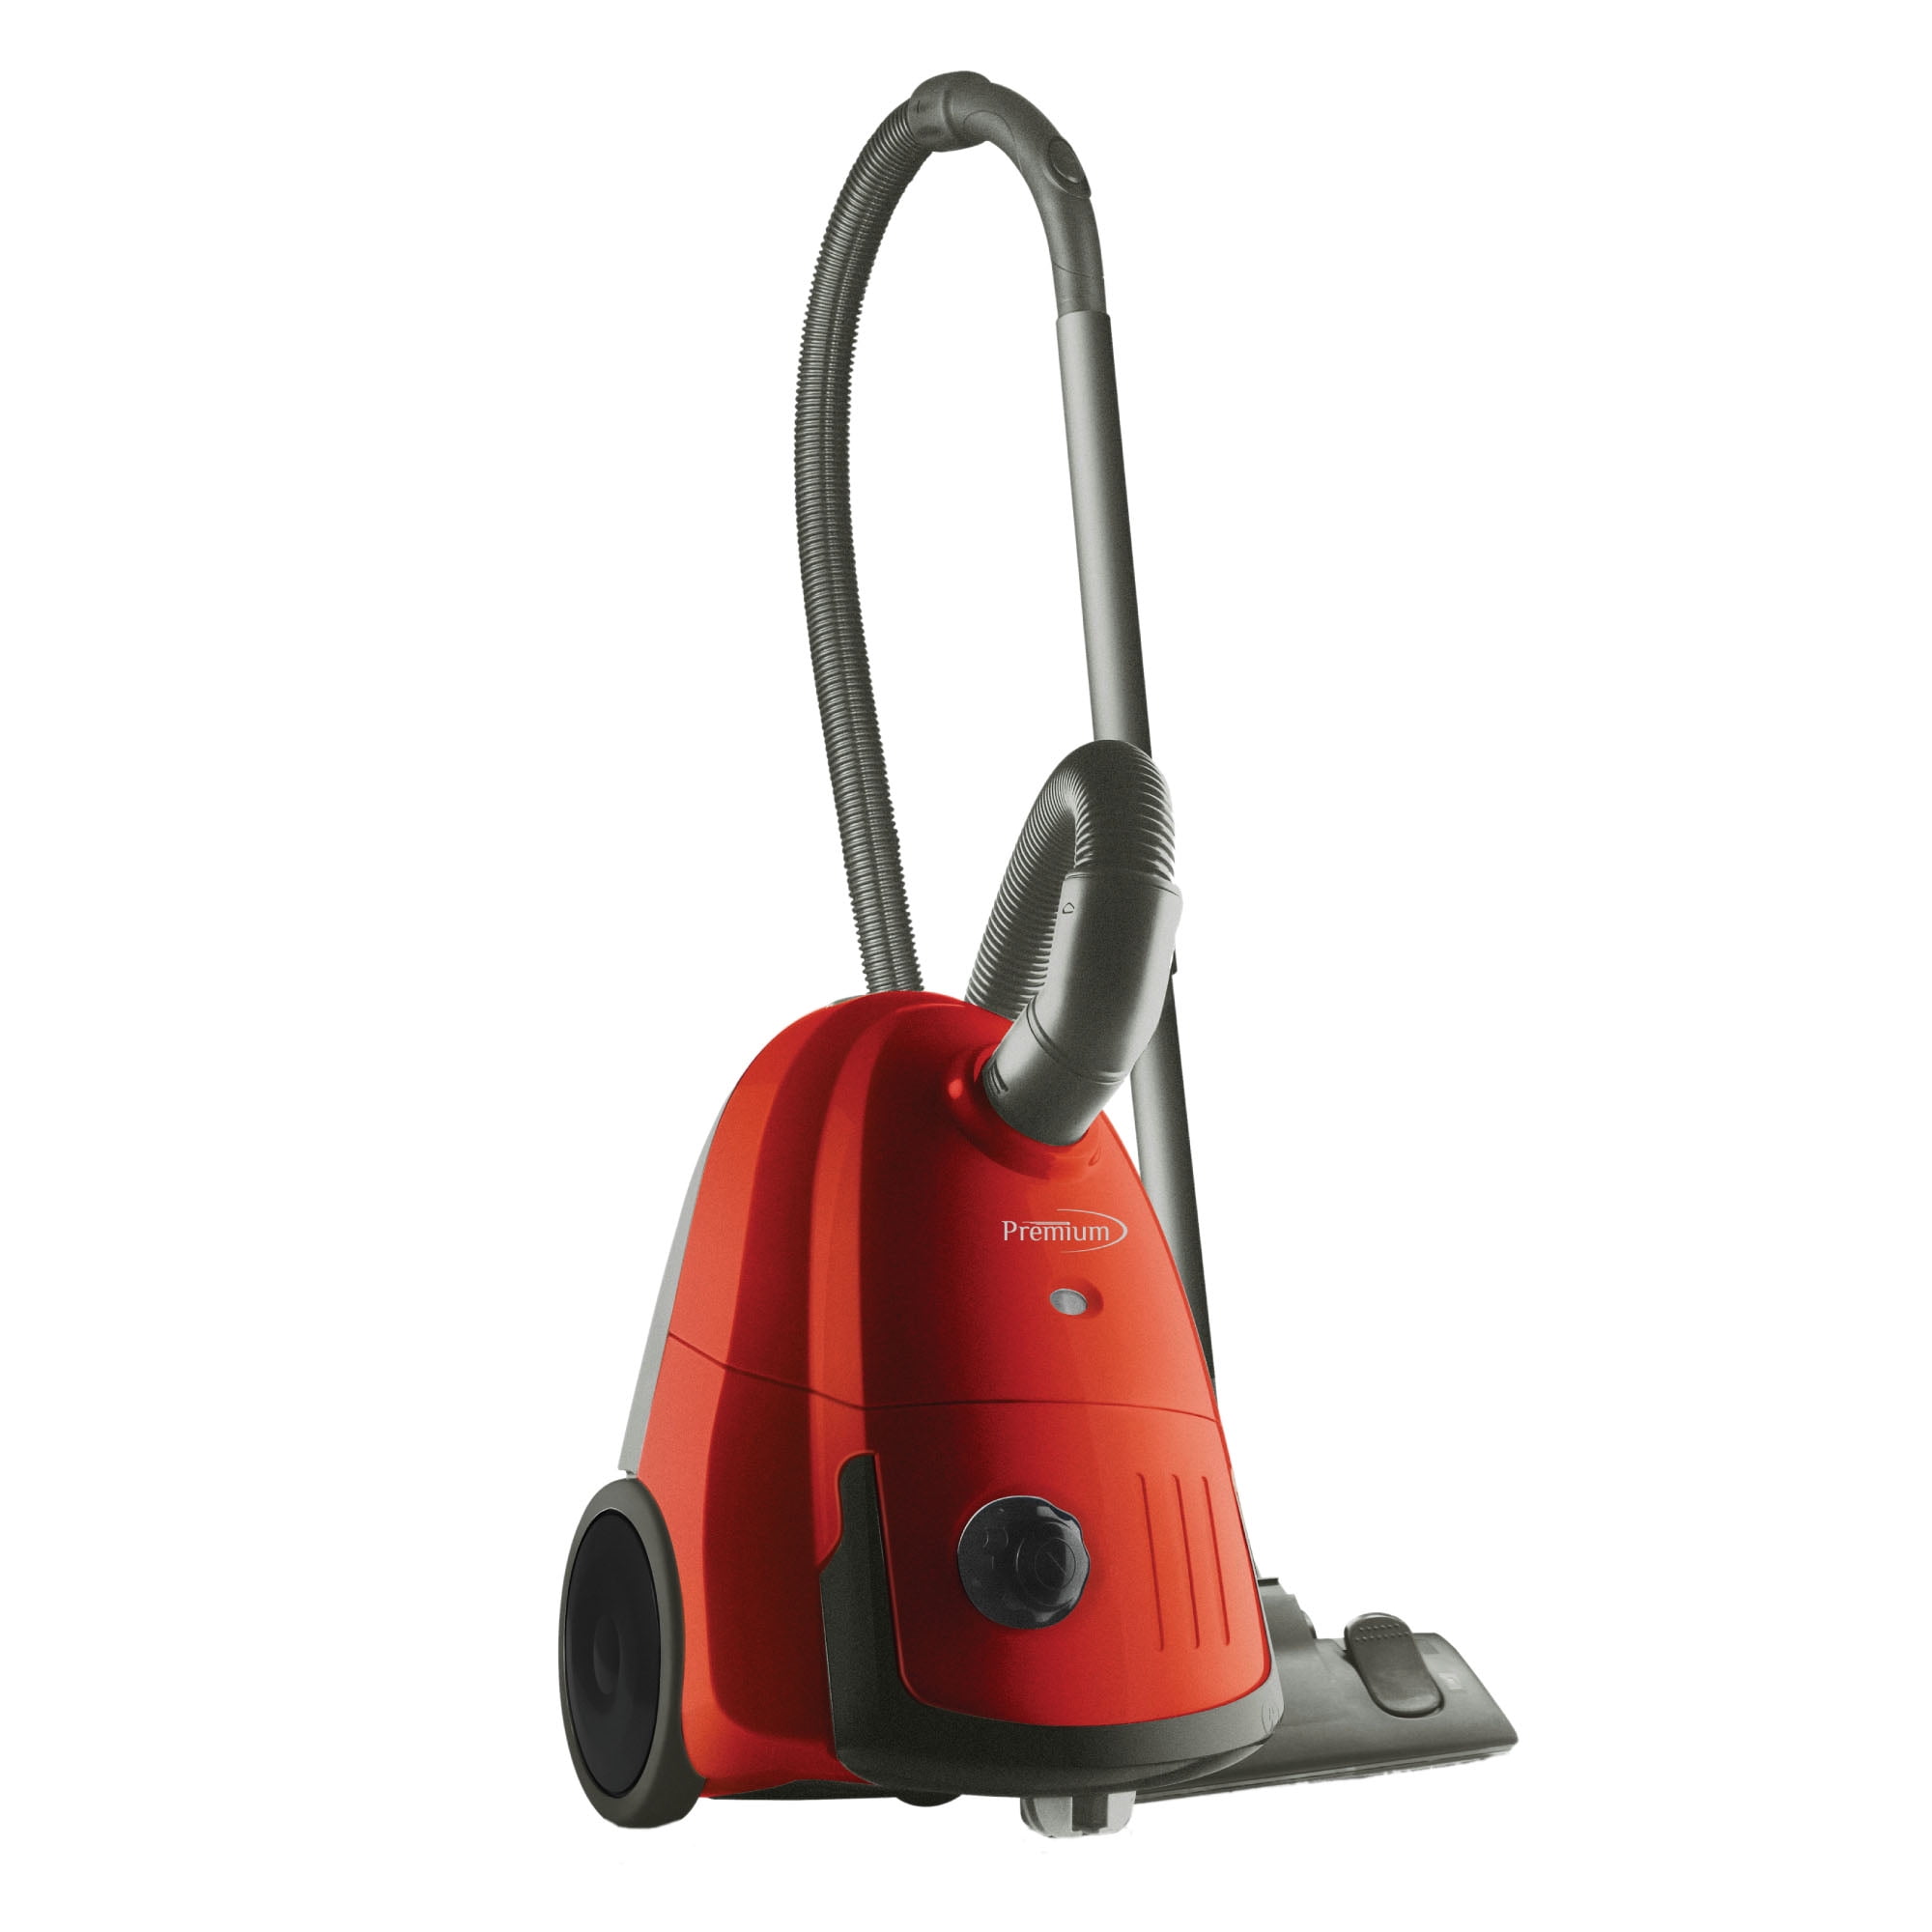 Canister vacuum cleaners. Canister Vacuum Cleaner. Пылесос Sanyo. Sanyo пылесос красный.